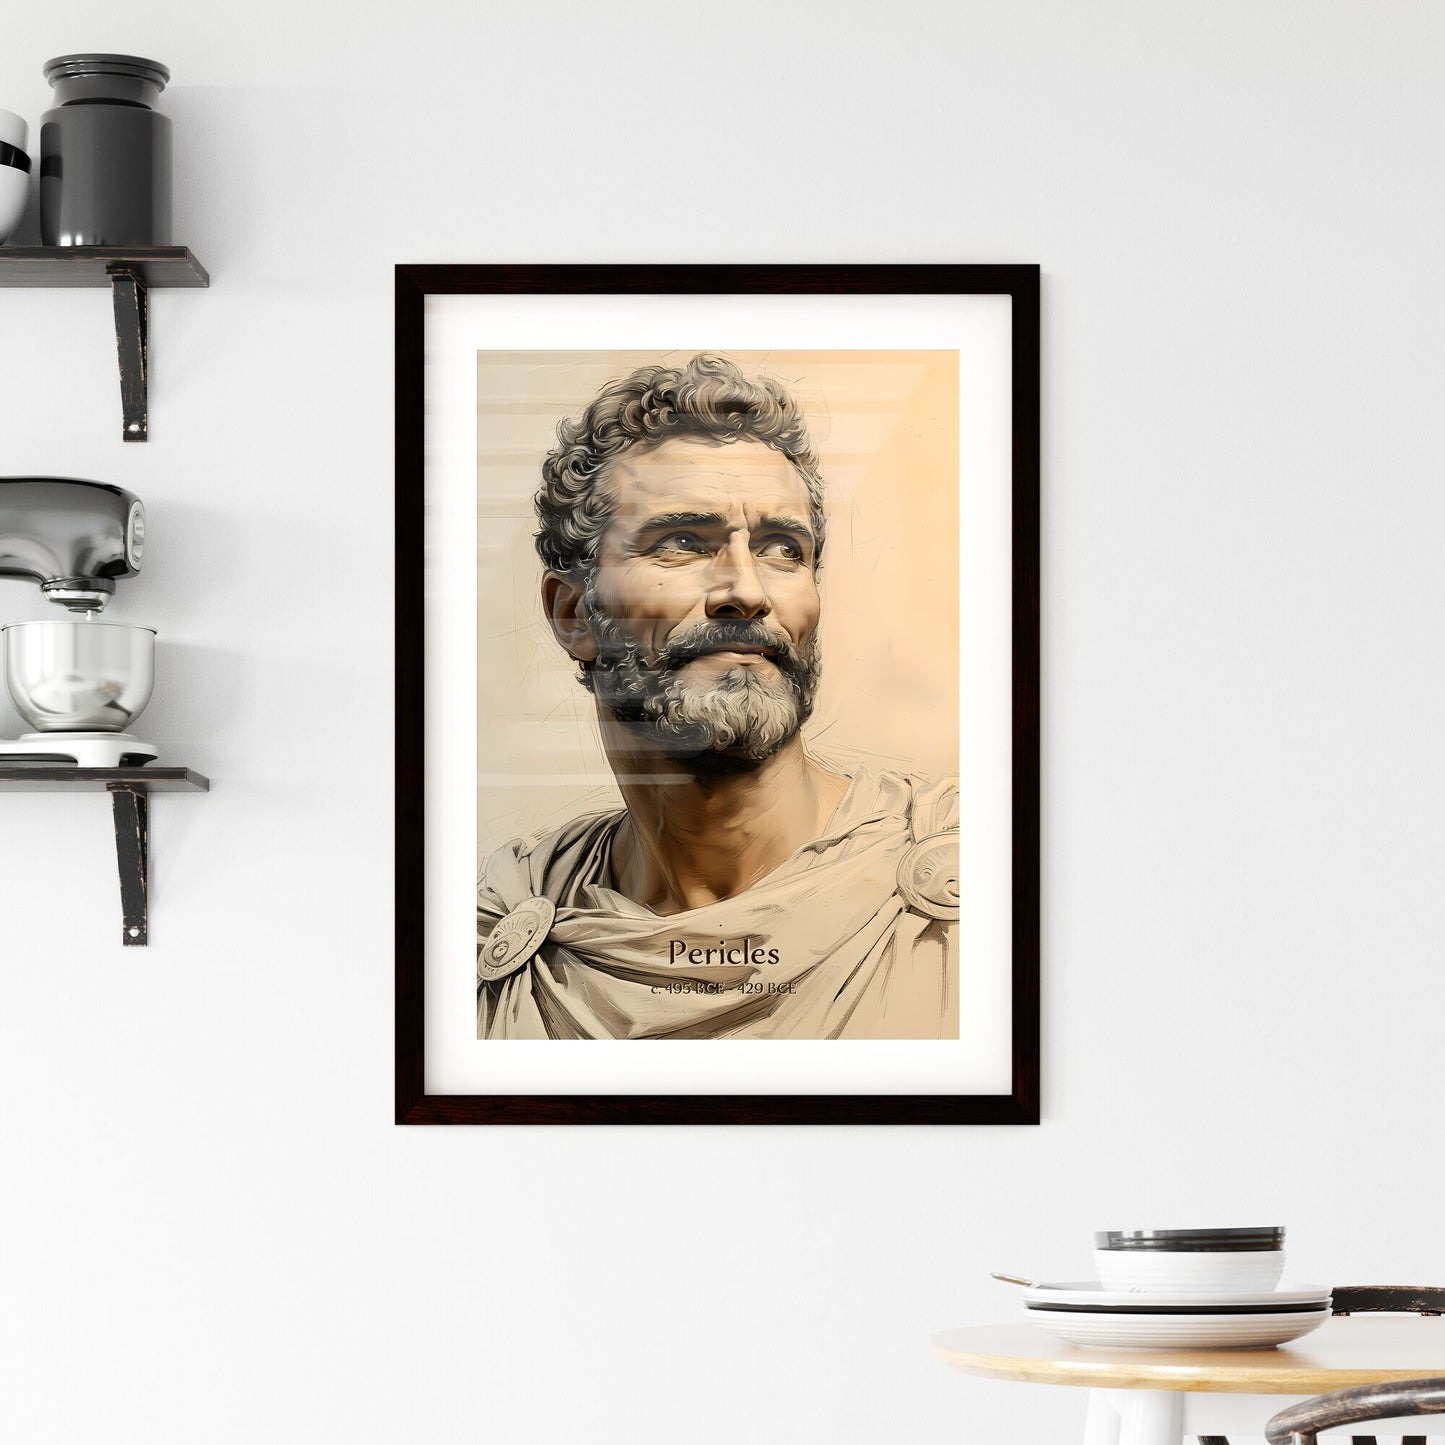 Pericles, c. 495 BCE - 429 BCE, A Poster of a drawing of a man with a beard Default Title